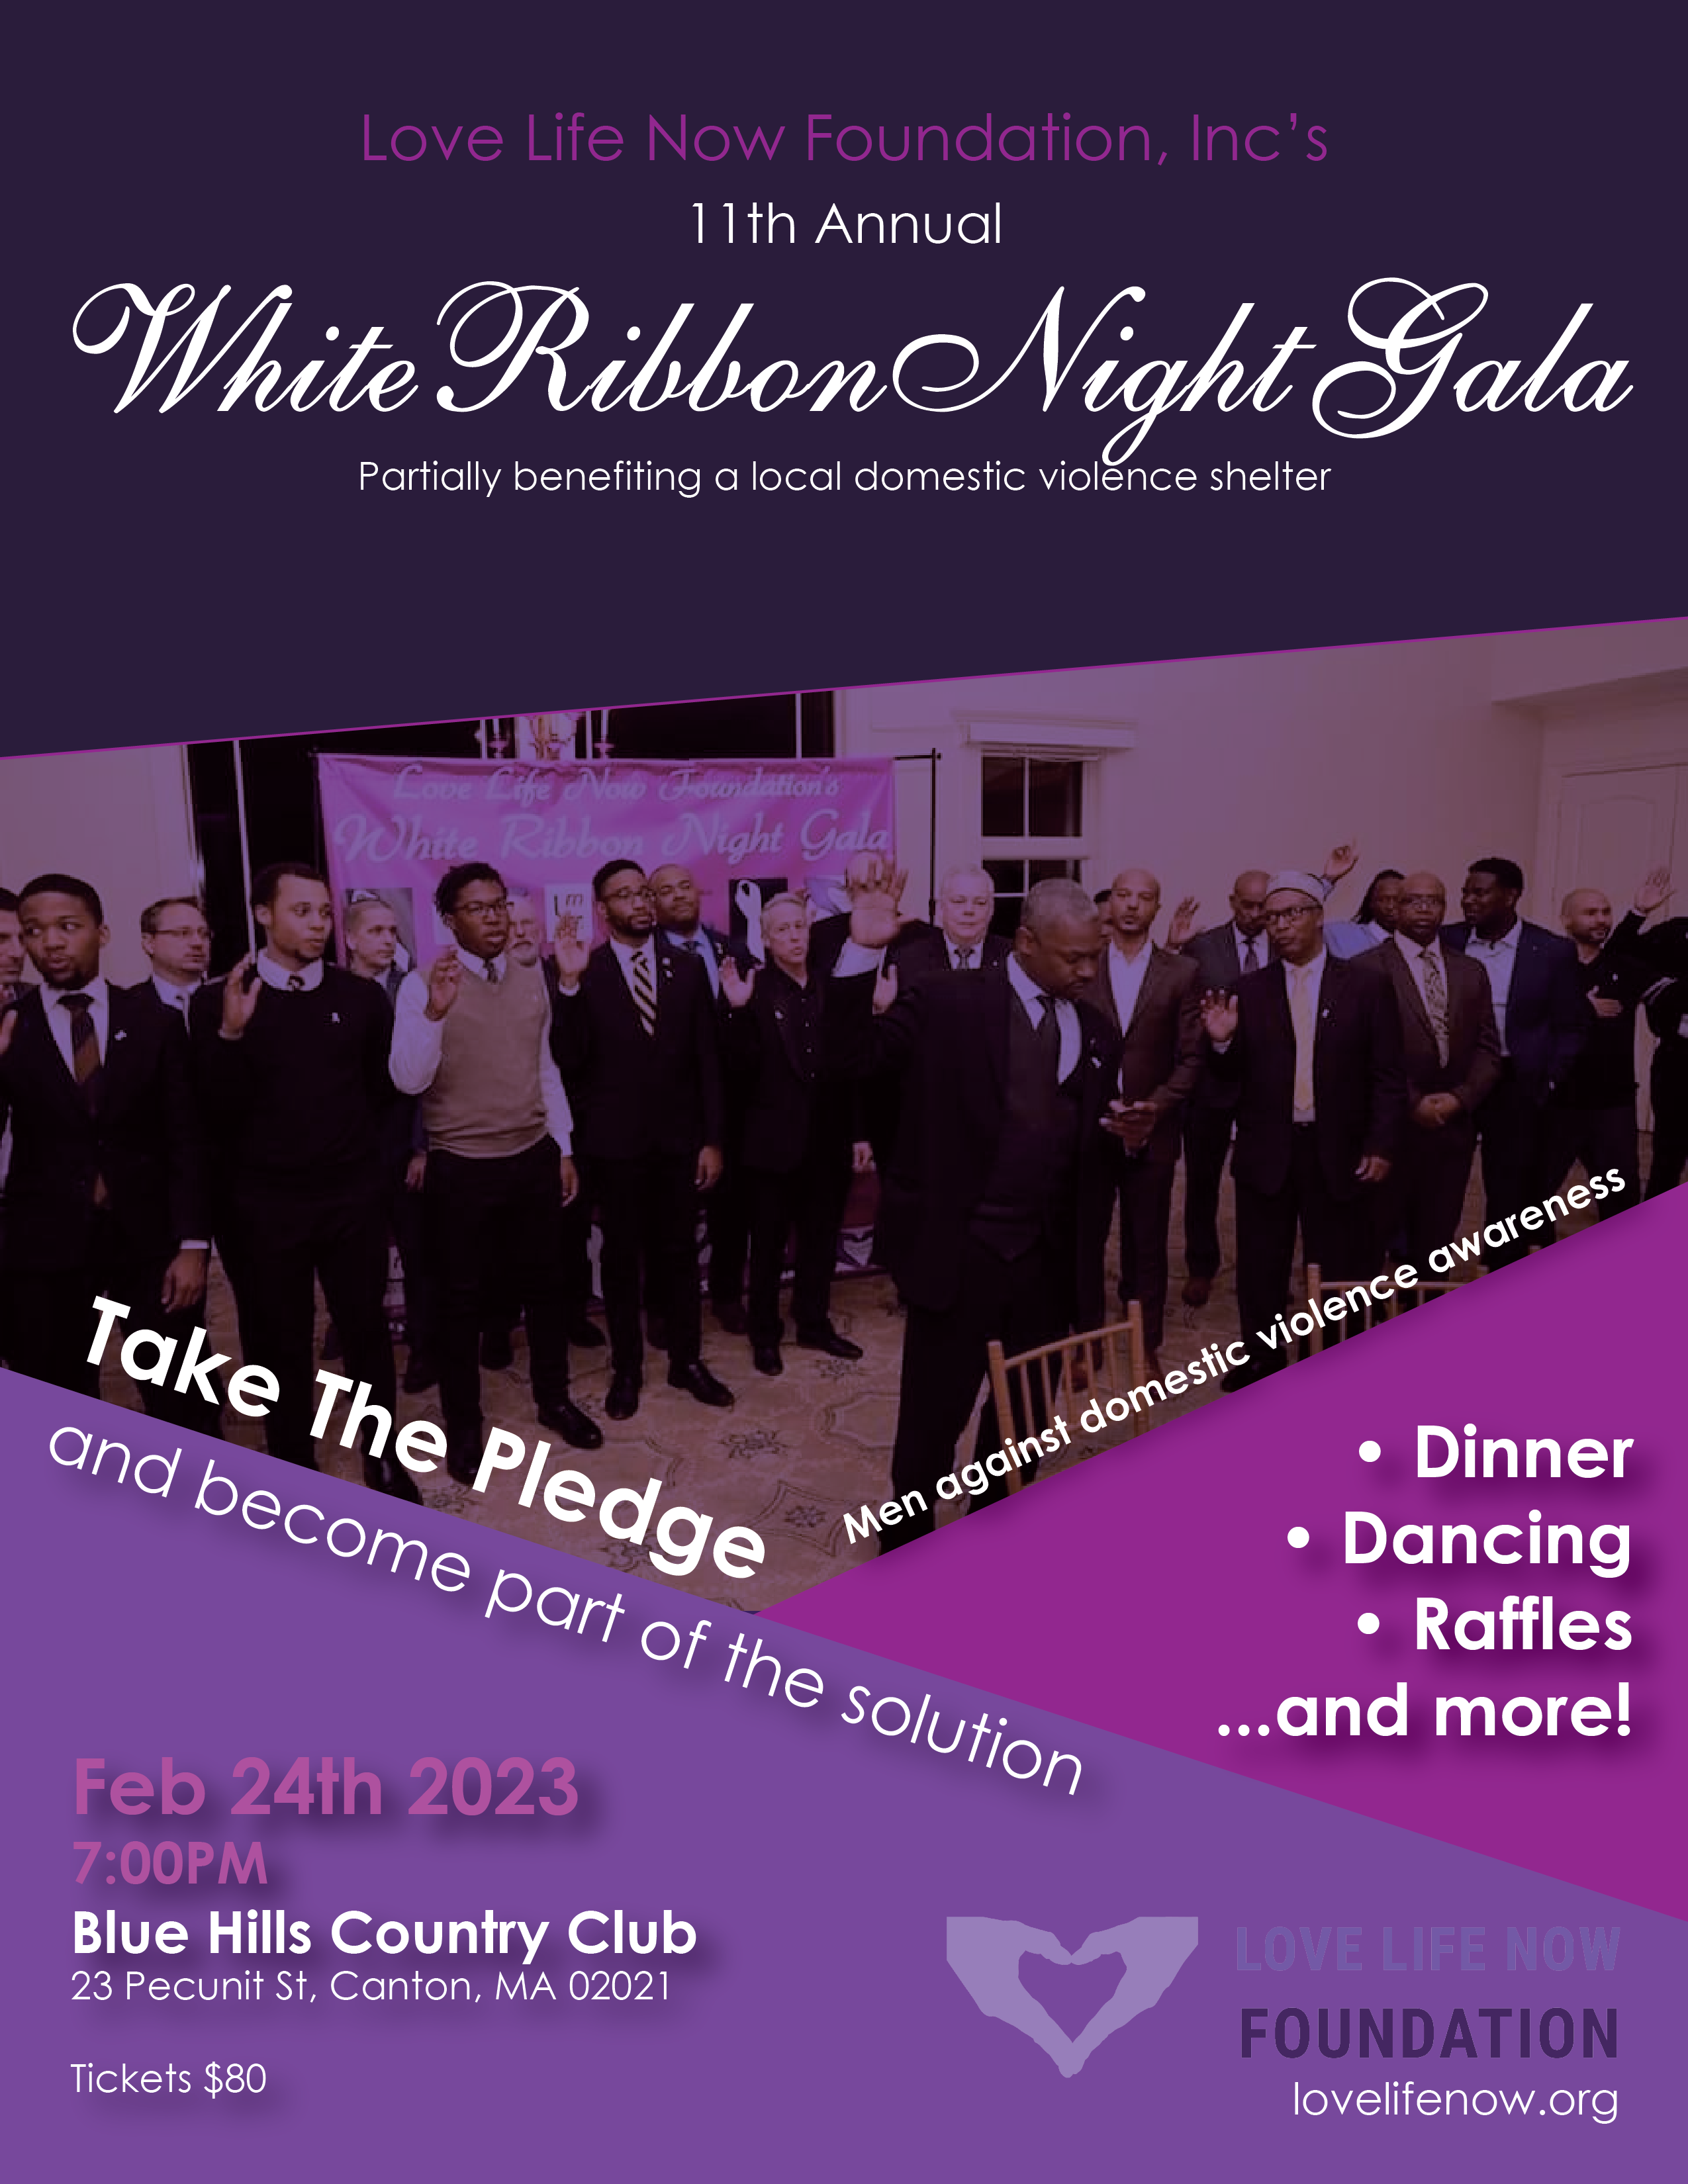 Love Life Now Foundation's 11th annual White Ribbon Night Gala